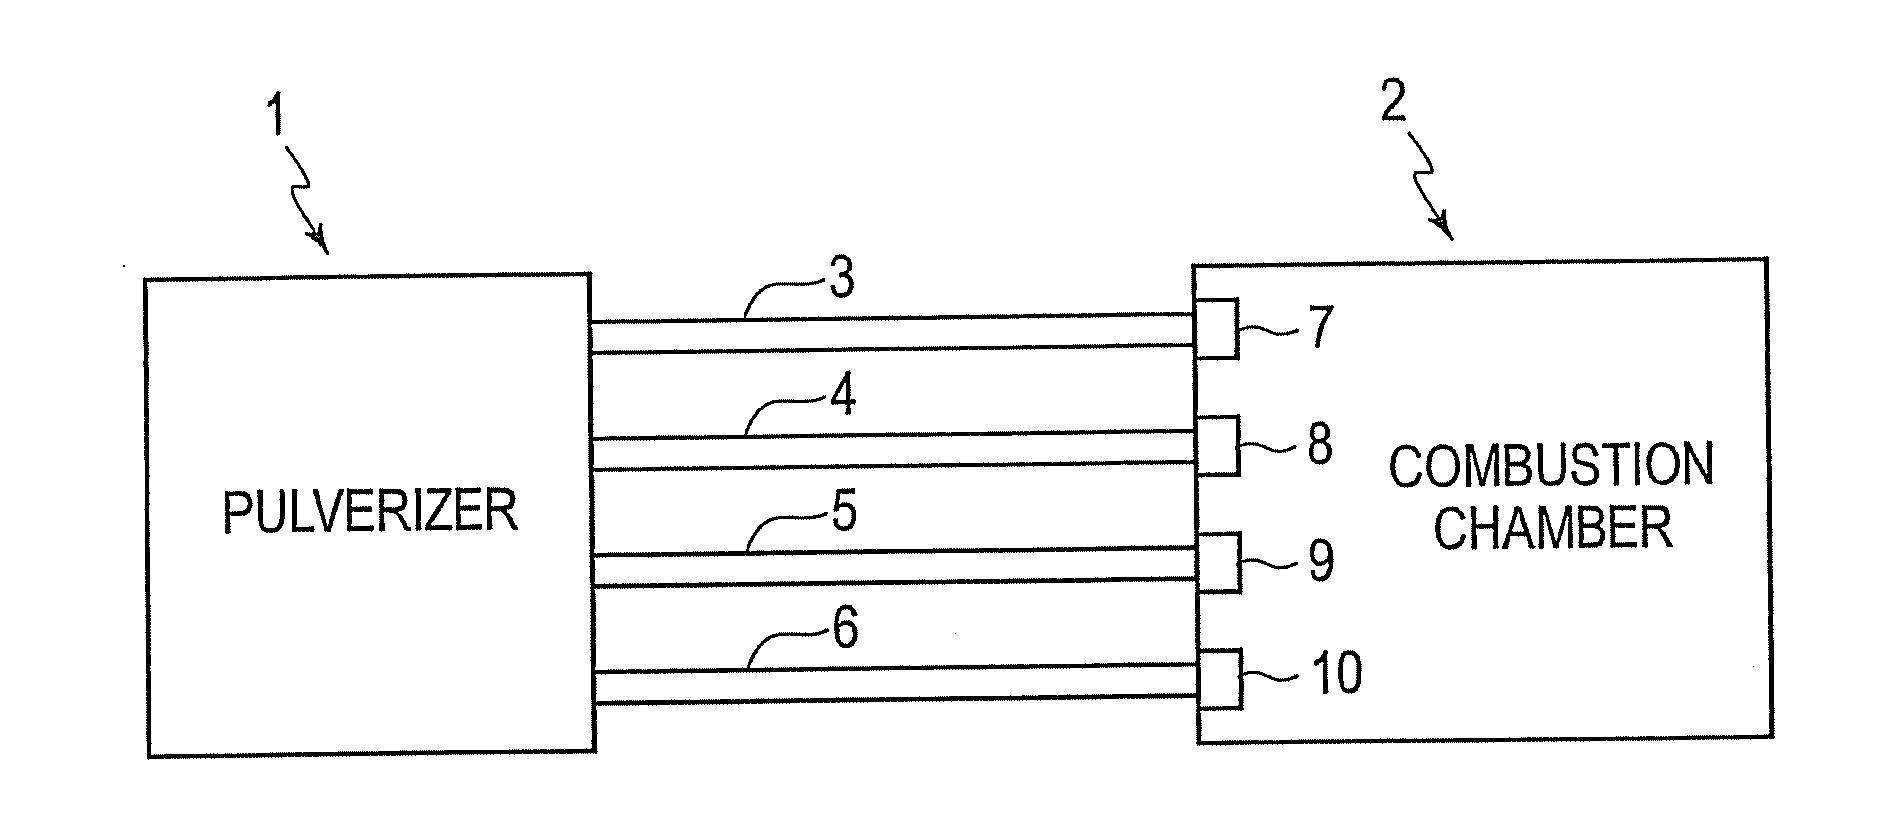 Method and apparatus for controlling relative  coal flow in pipes from a pulverizer